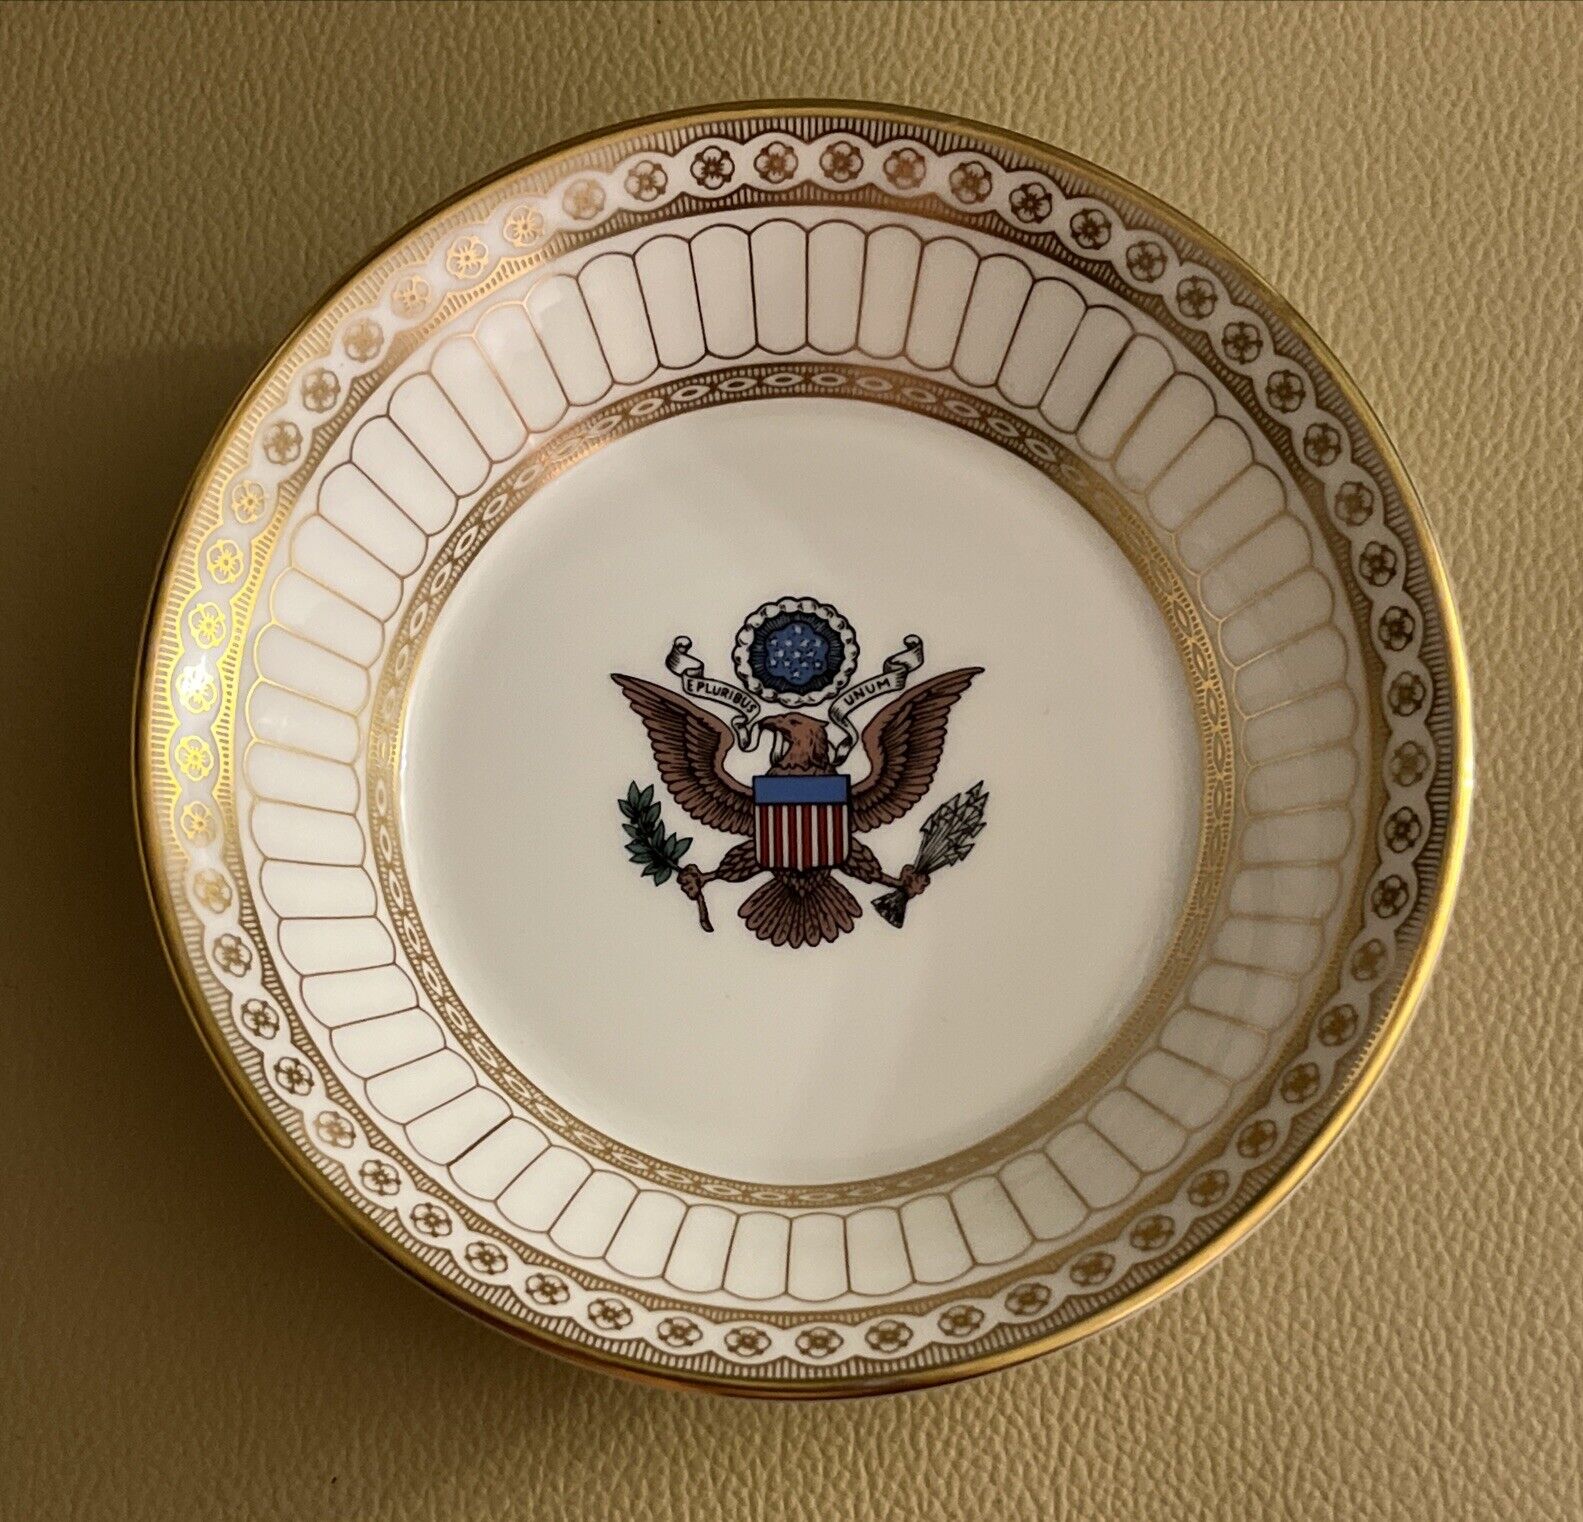 Wedgwood Colonnade The Wedgwood Collectors Society The Great Seal Of USA 5” Bowl